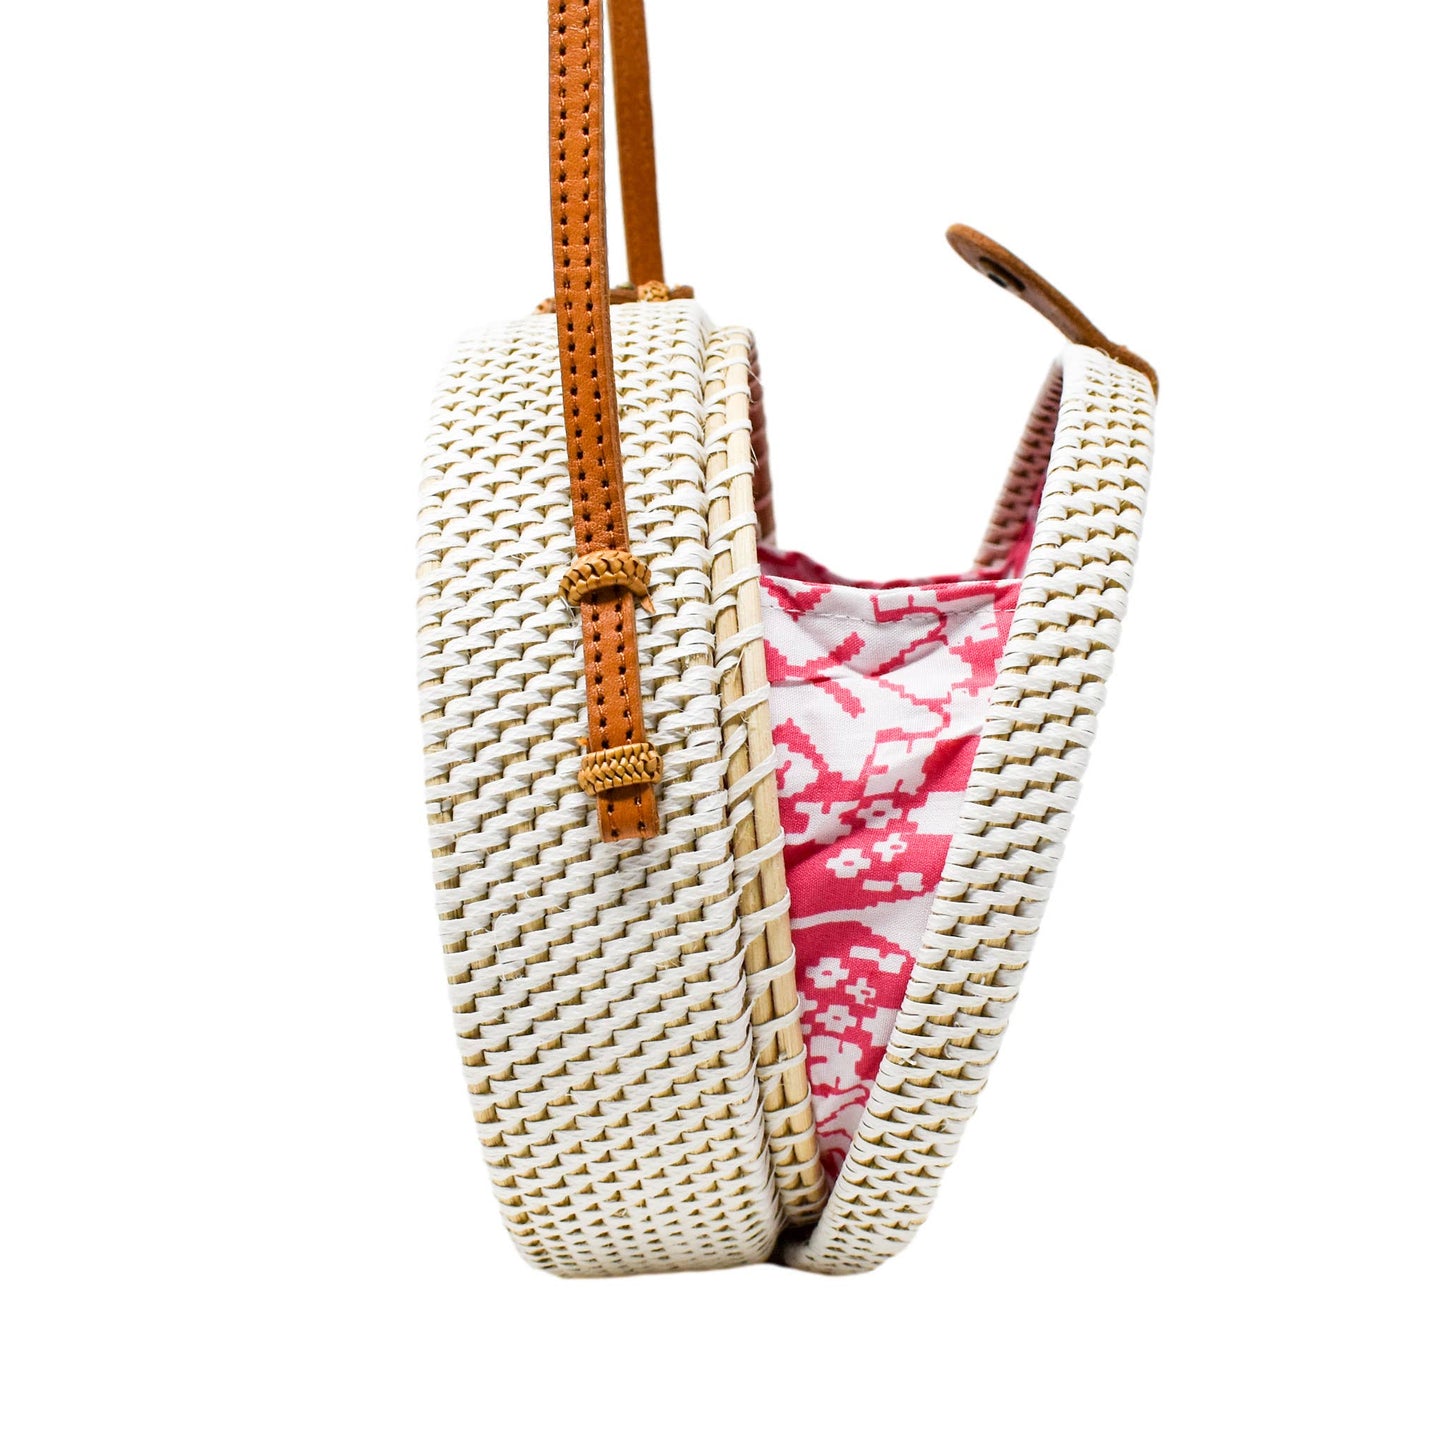 Poppy and Sage White Camilla Bag-Pink Lining